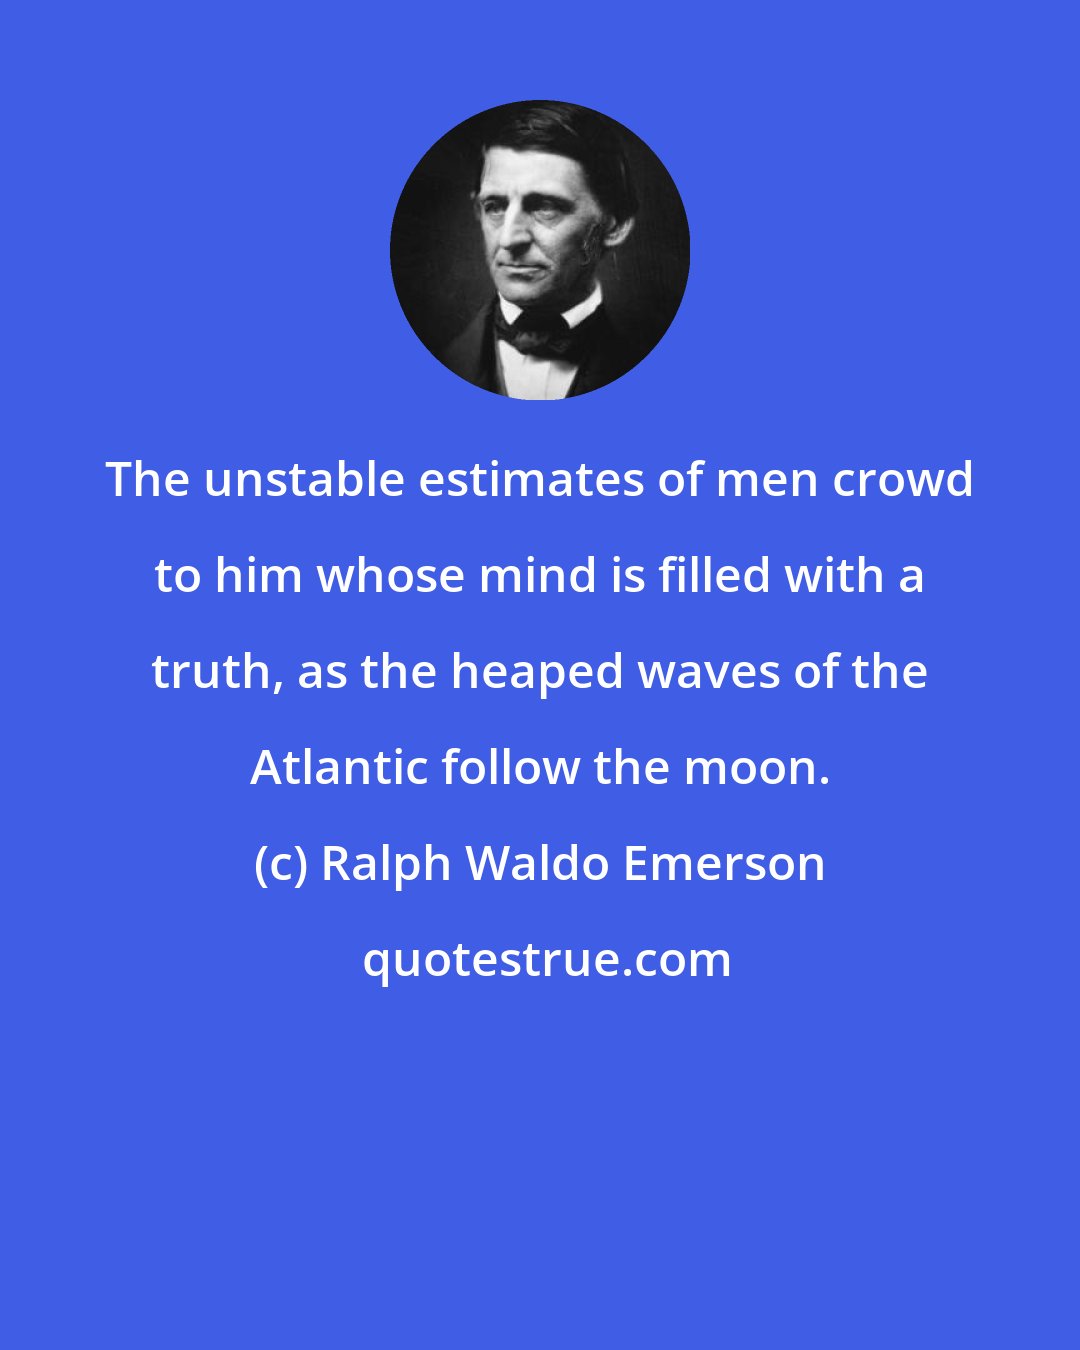 Ralph Waldo Emerson: The unstable estimates of men crowd to him whose mind is filled with a truth, as the heaped waves of the Atlantic follow the moon.